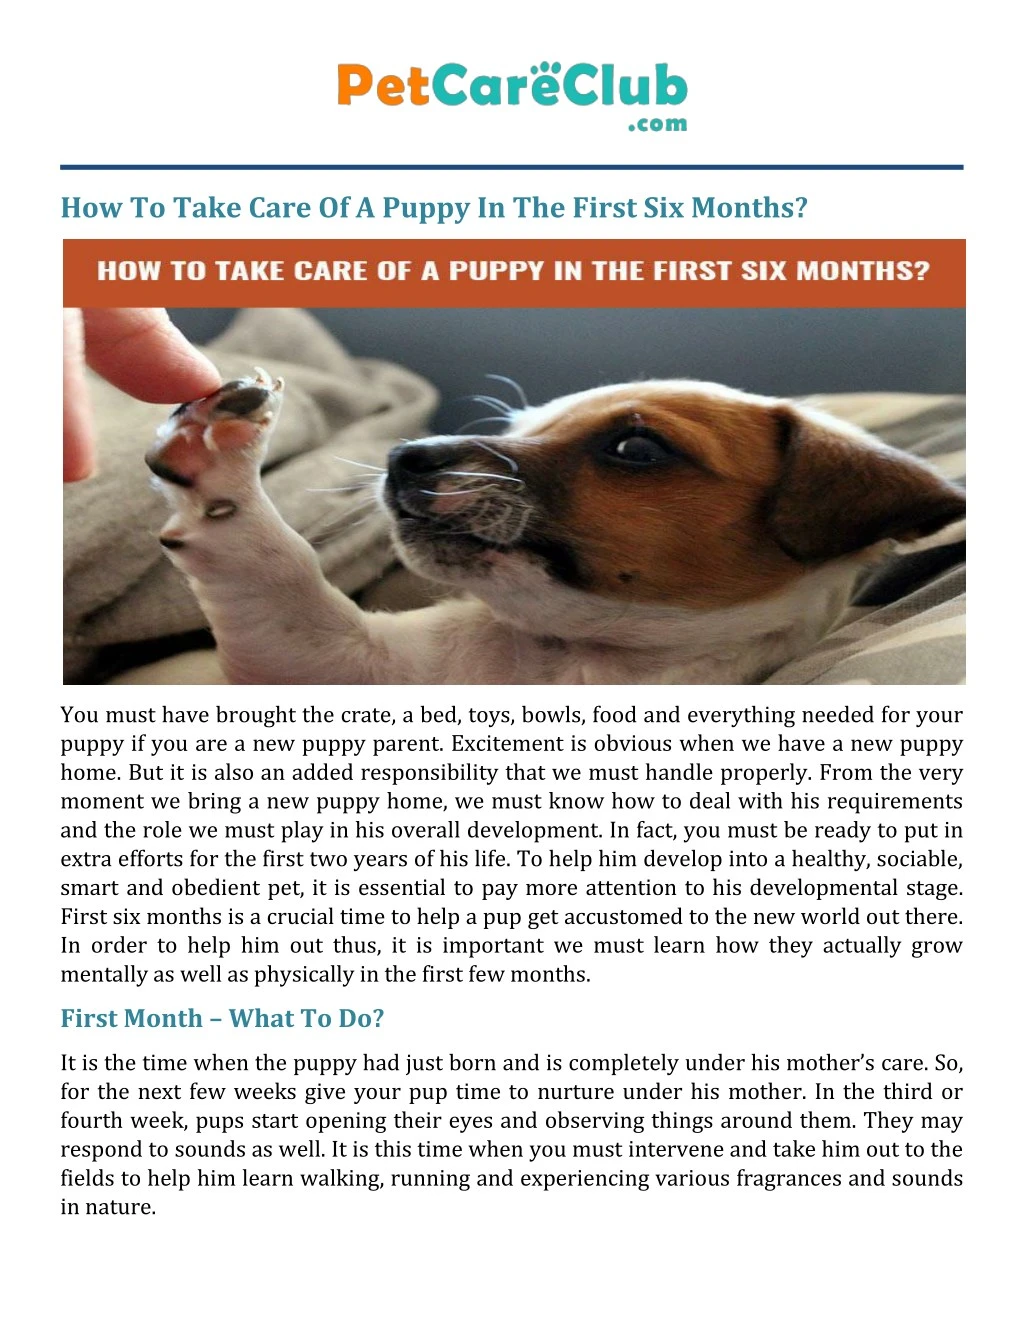 how to take care of a puppy in the first